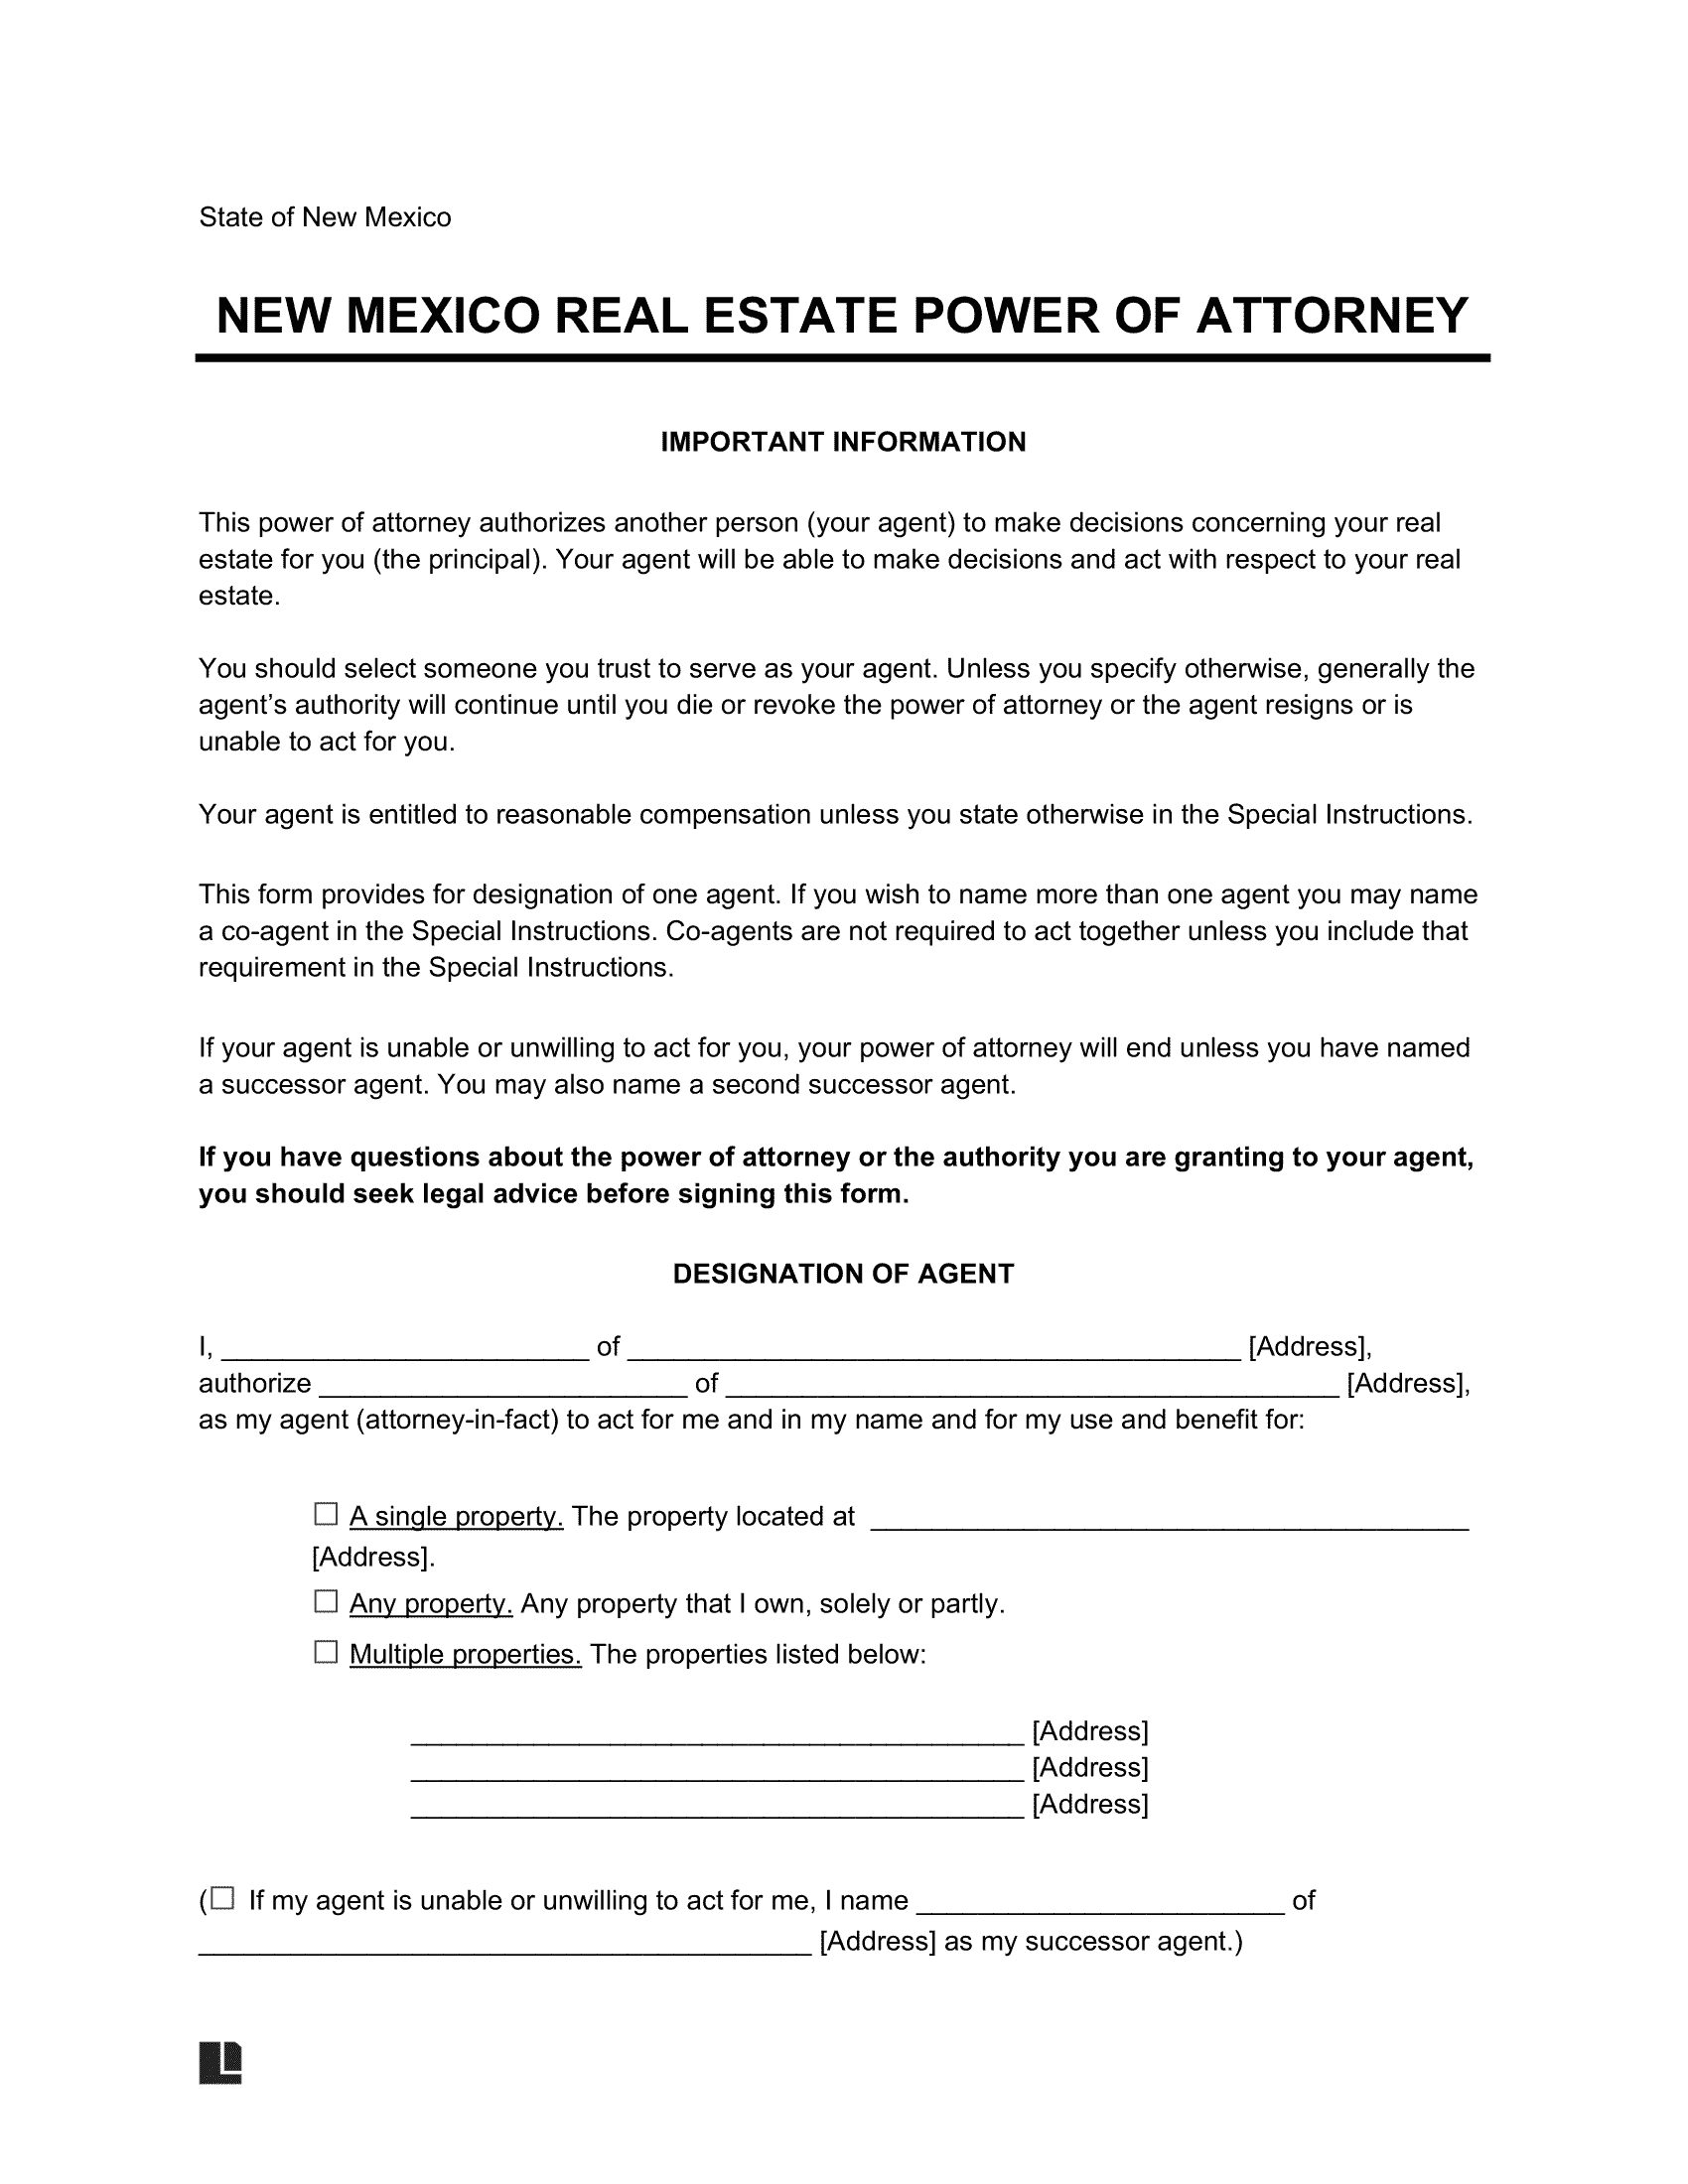 New Mexico Real Estate Power of Attorney Form